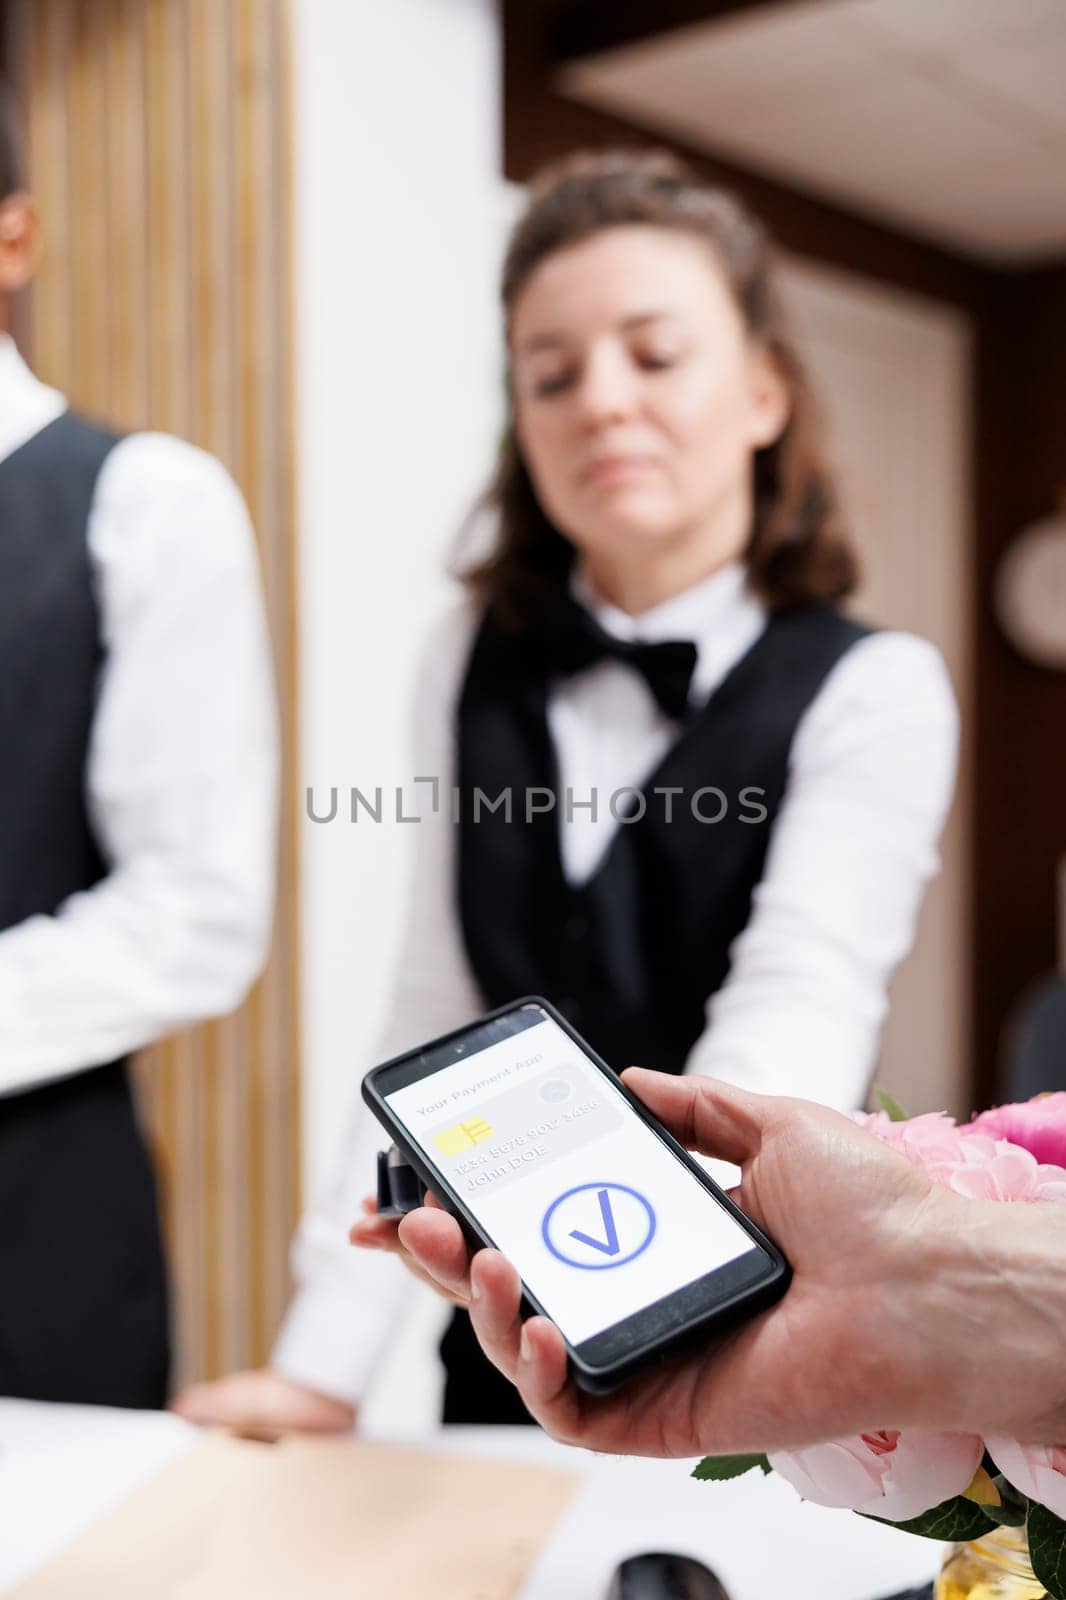 Nfc payment with phone at hotel lobby by DCStudio